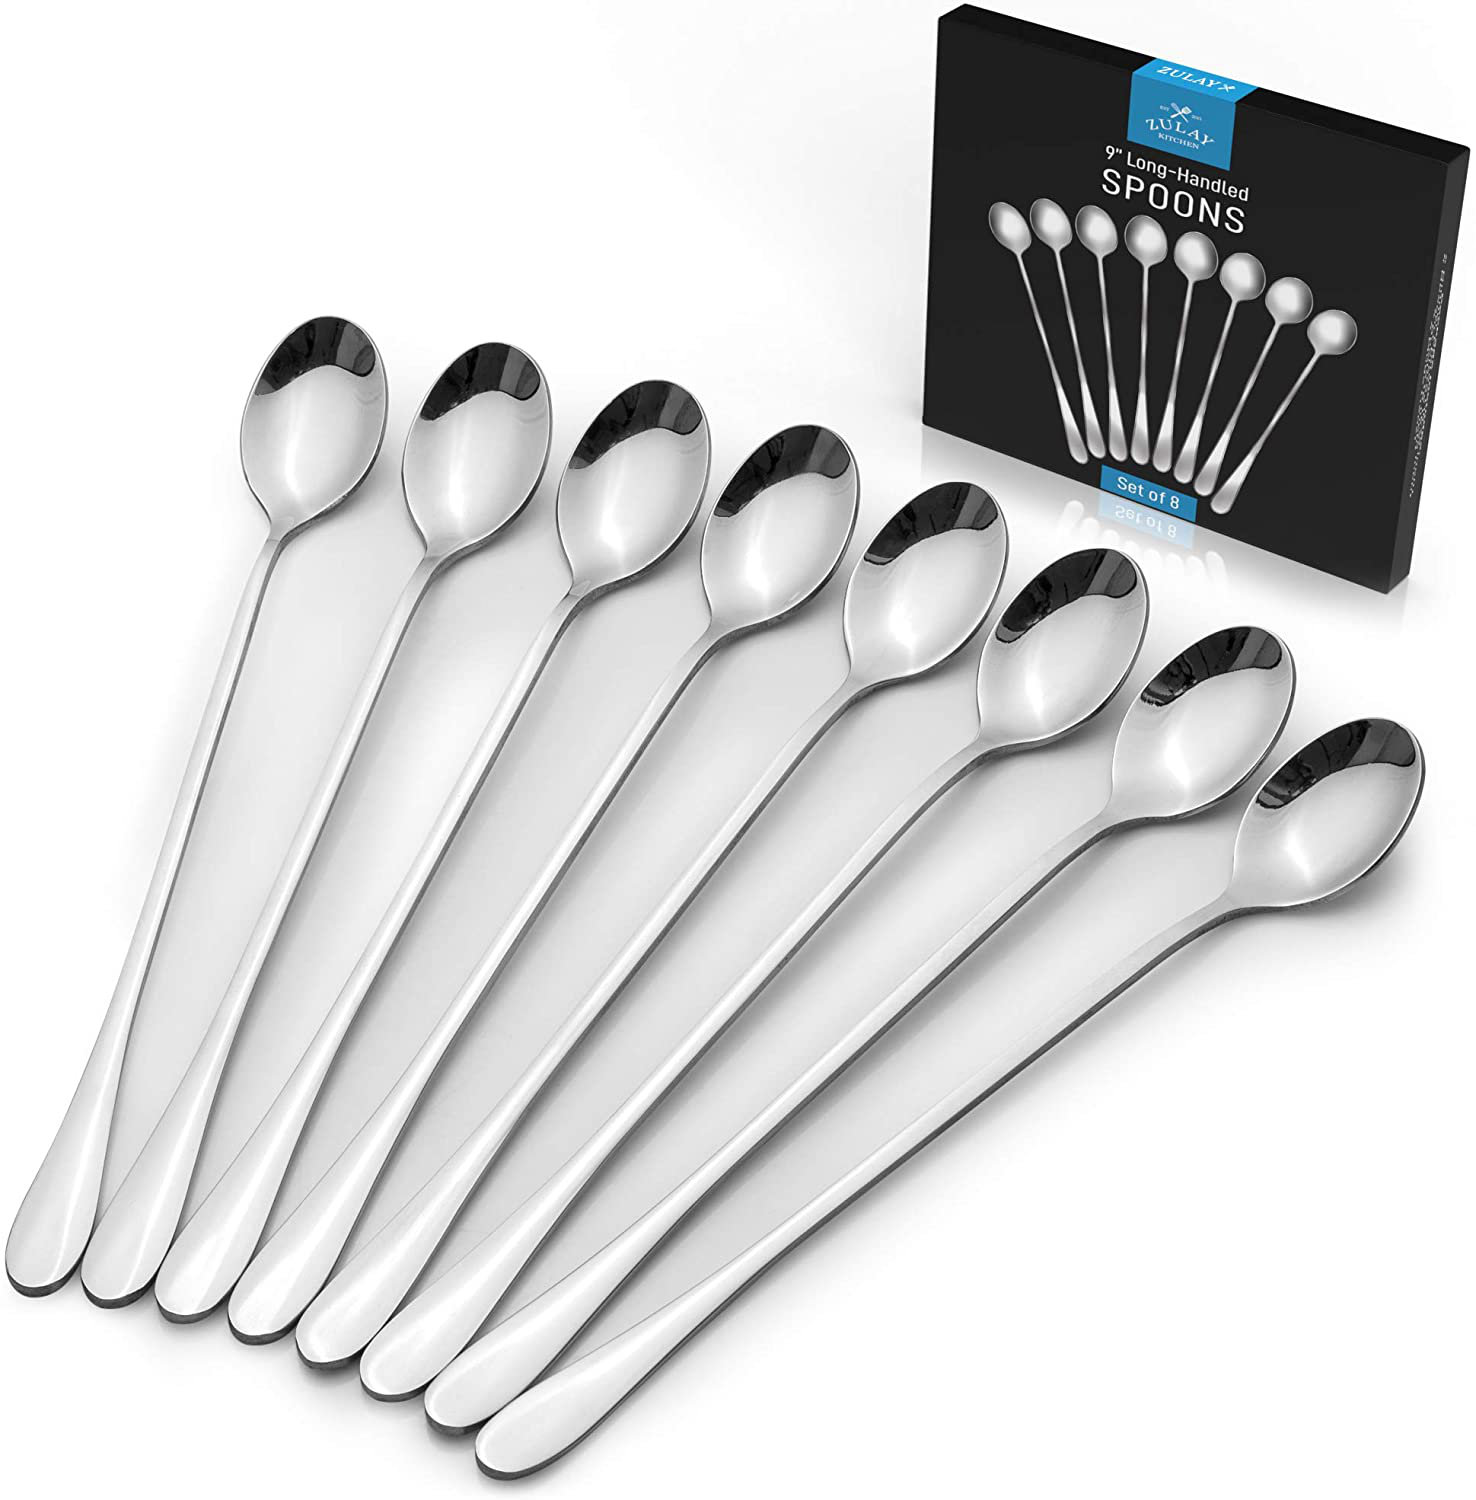 Zulay Heavy Duty Stainless Steel Measuring Spoons with Easy To